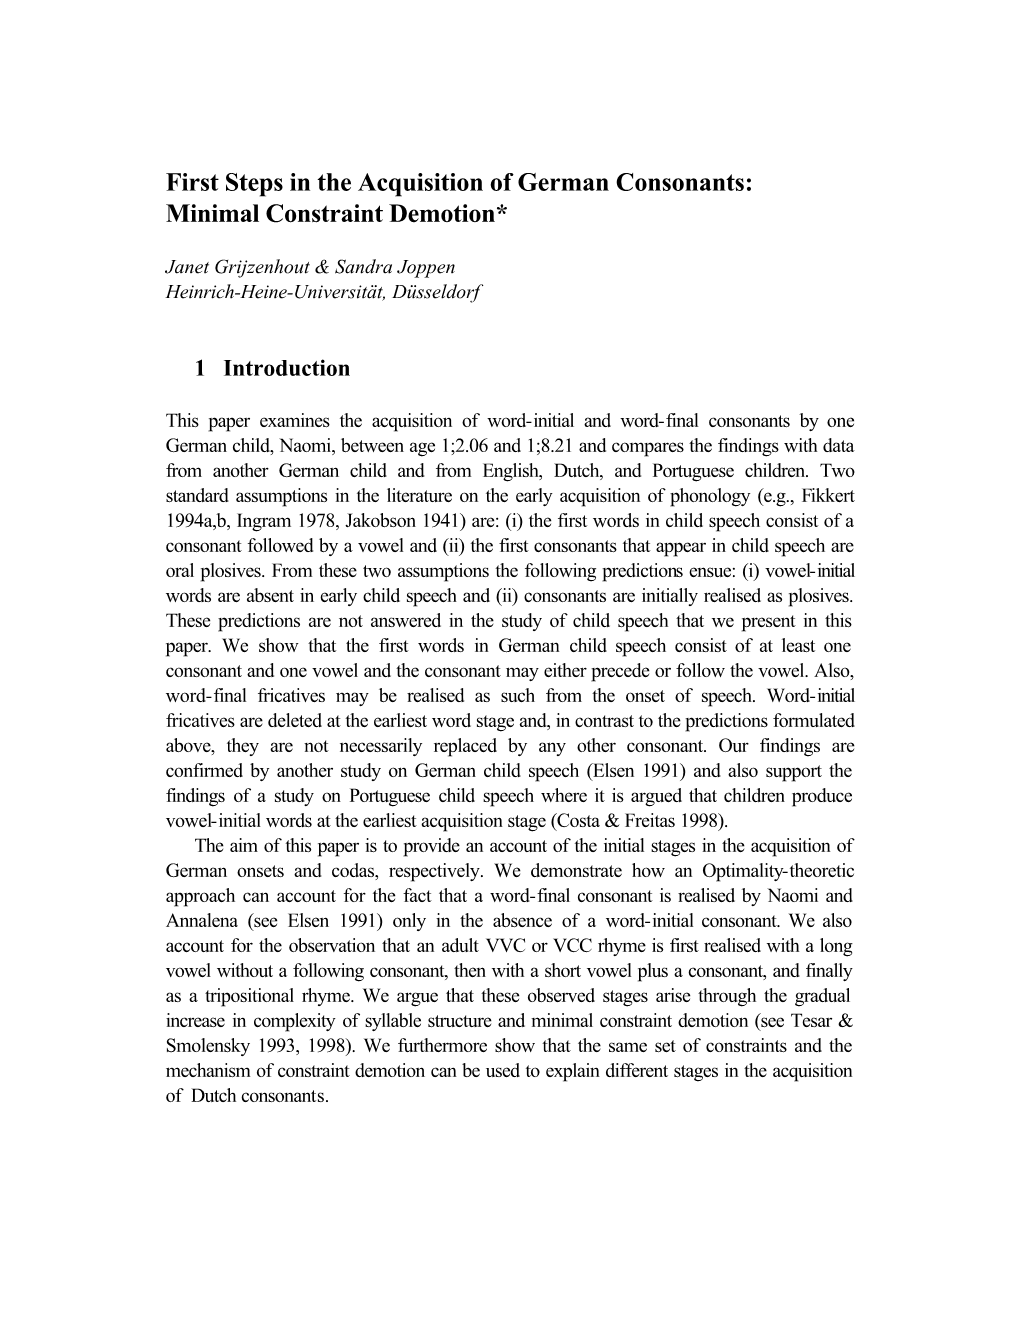 First Steps in the Acquisition of German Consonants: Minimal Constraint Demotion*